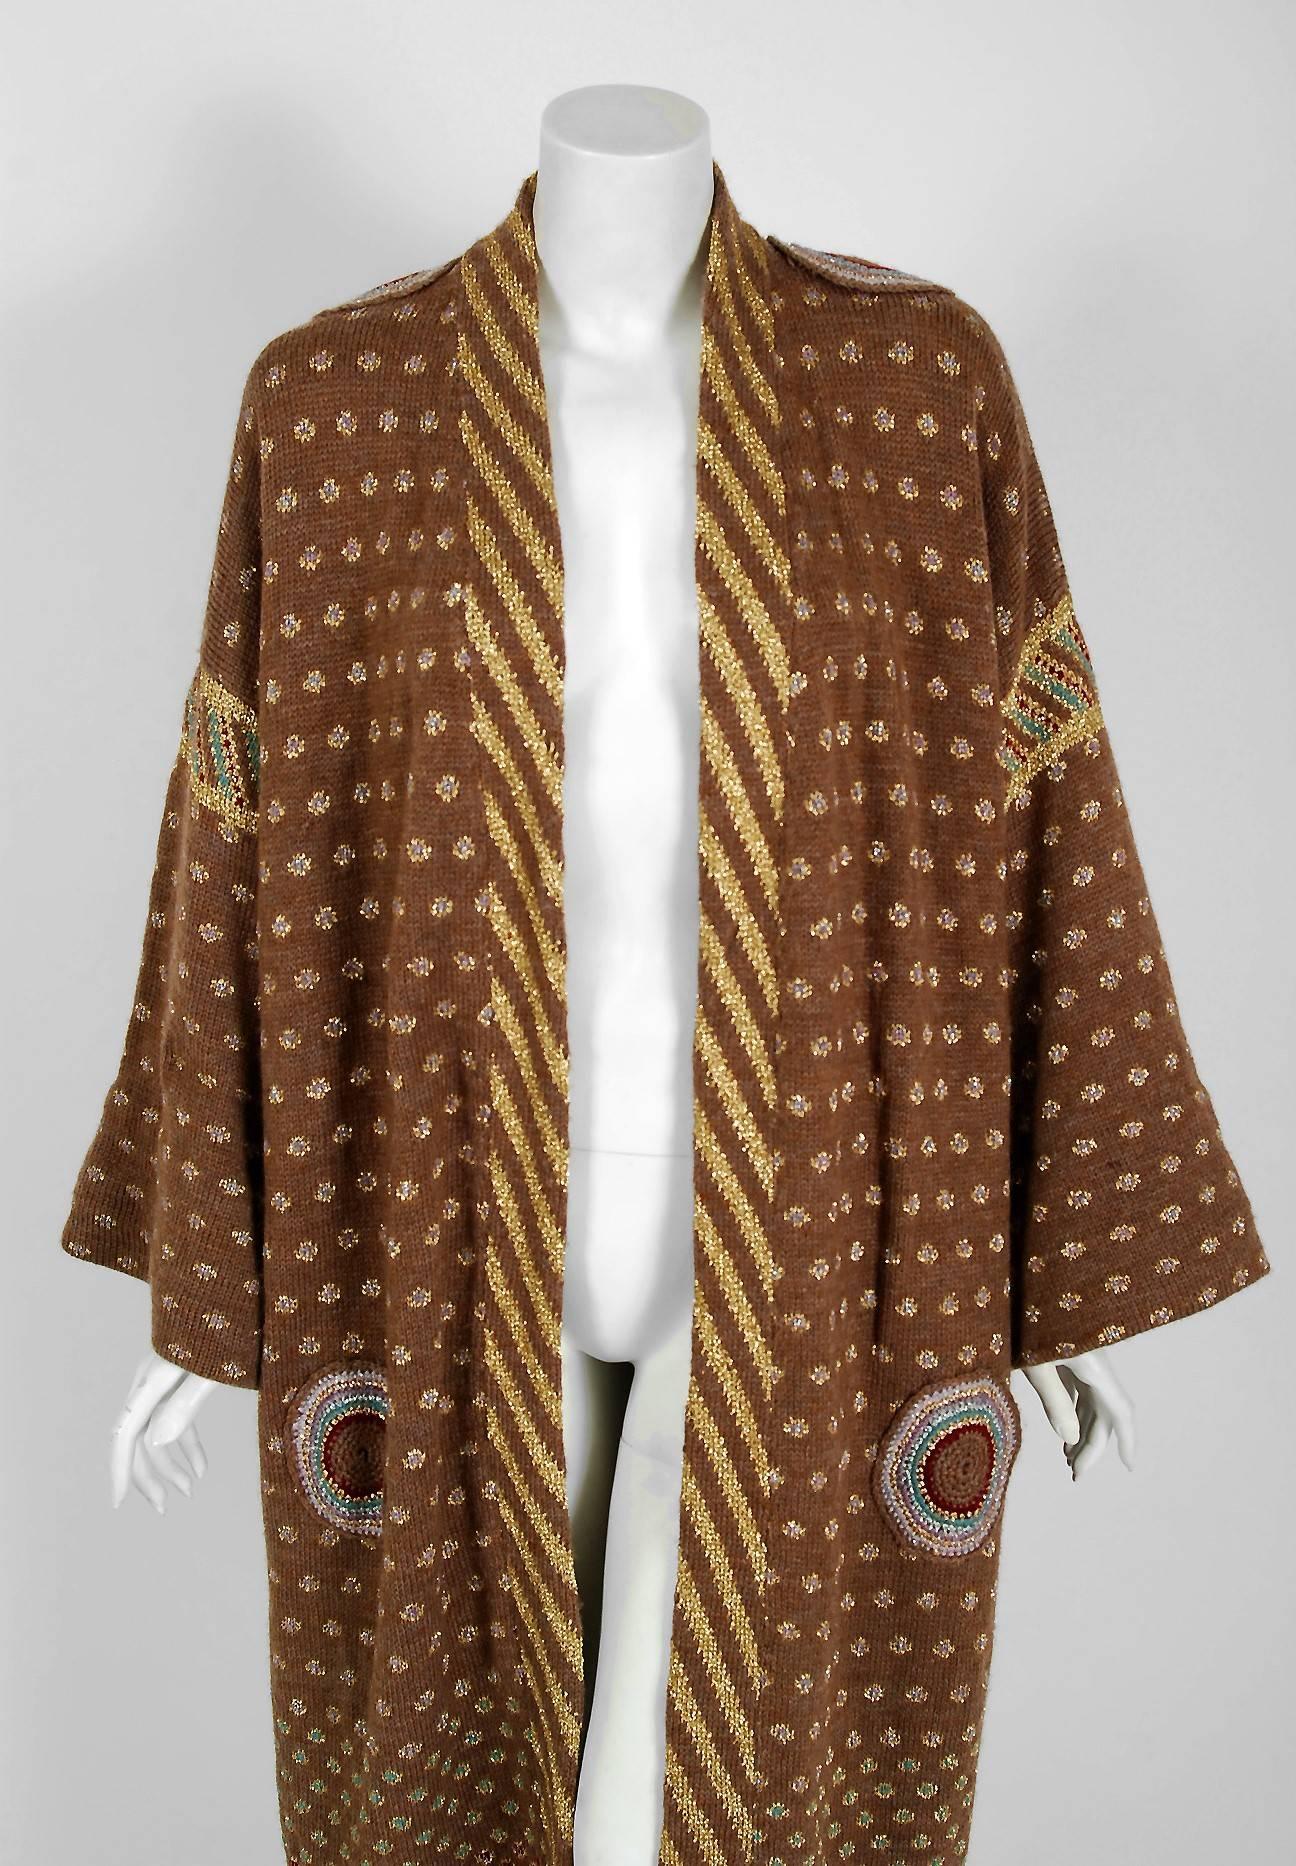 Timeless Vixen is excited to offer this breathtaking 1974 Bill Gibbs museum quality colorful hand-knit kimono sweater jacket. Bill Gibbs, the British iconic designer of the 1970's, drew his patterns on paper and with the knit wear guru Keffe Fassett